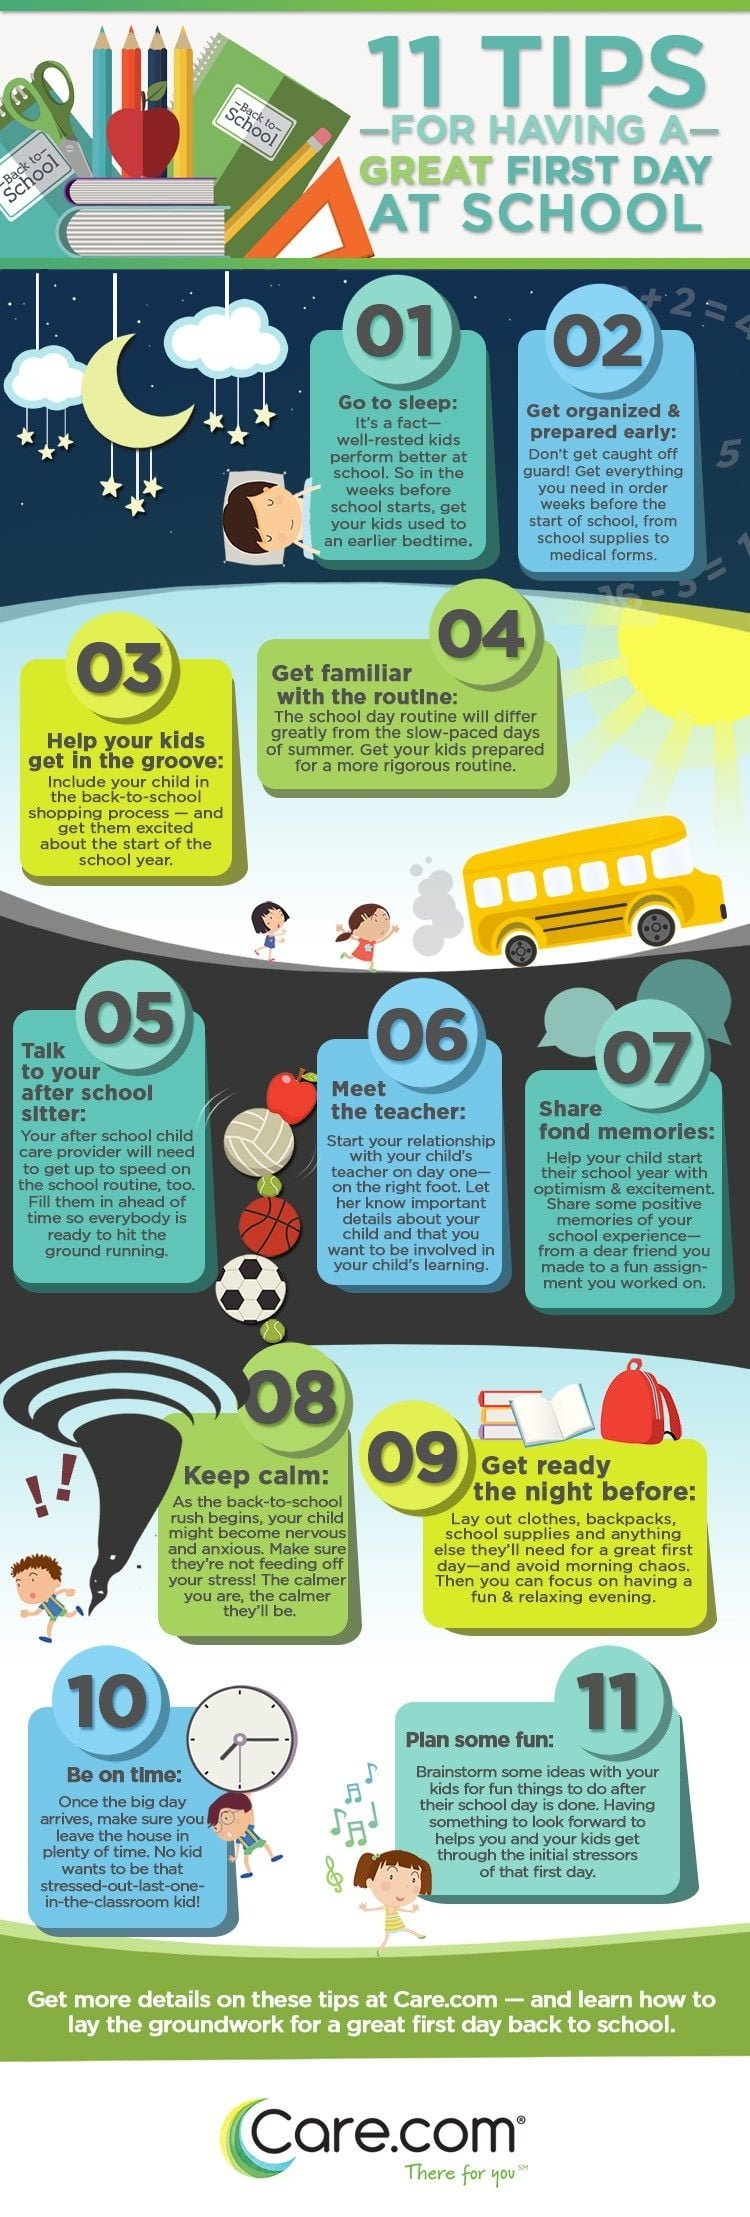 10 Famous First Day Of Kindergarten Ideas For Parents 11 tips for having a great first day of school care 2022